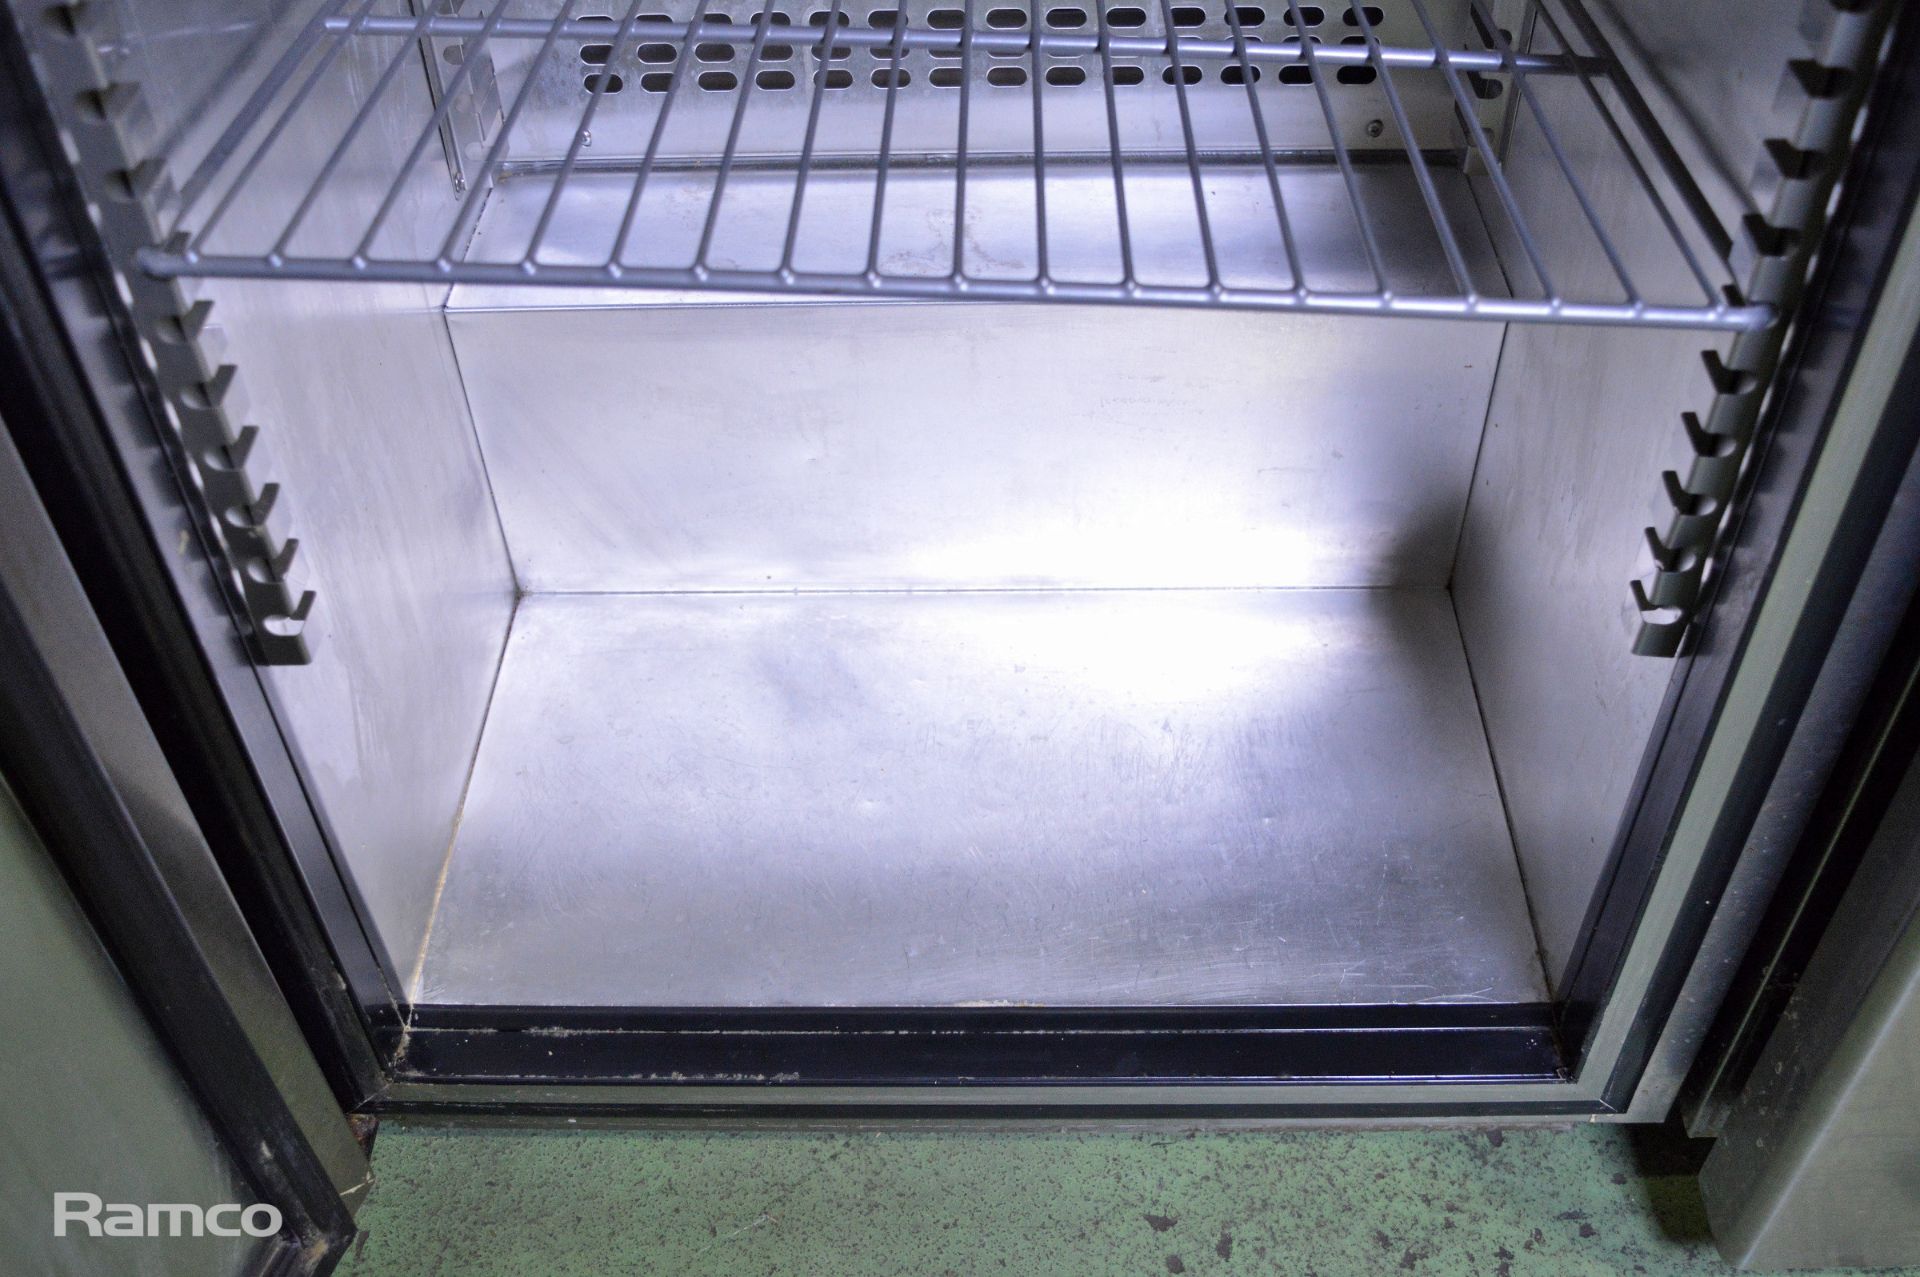 Foster HR150-A Stainless Stainless Fridge Unit - L600 x W640 x H820mm - Image 3 of 4